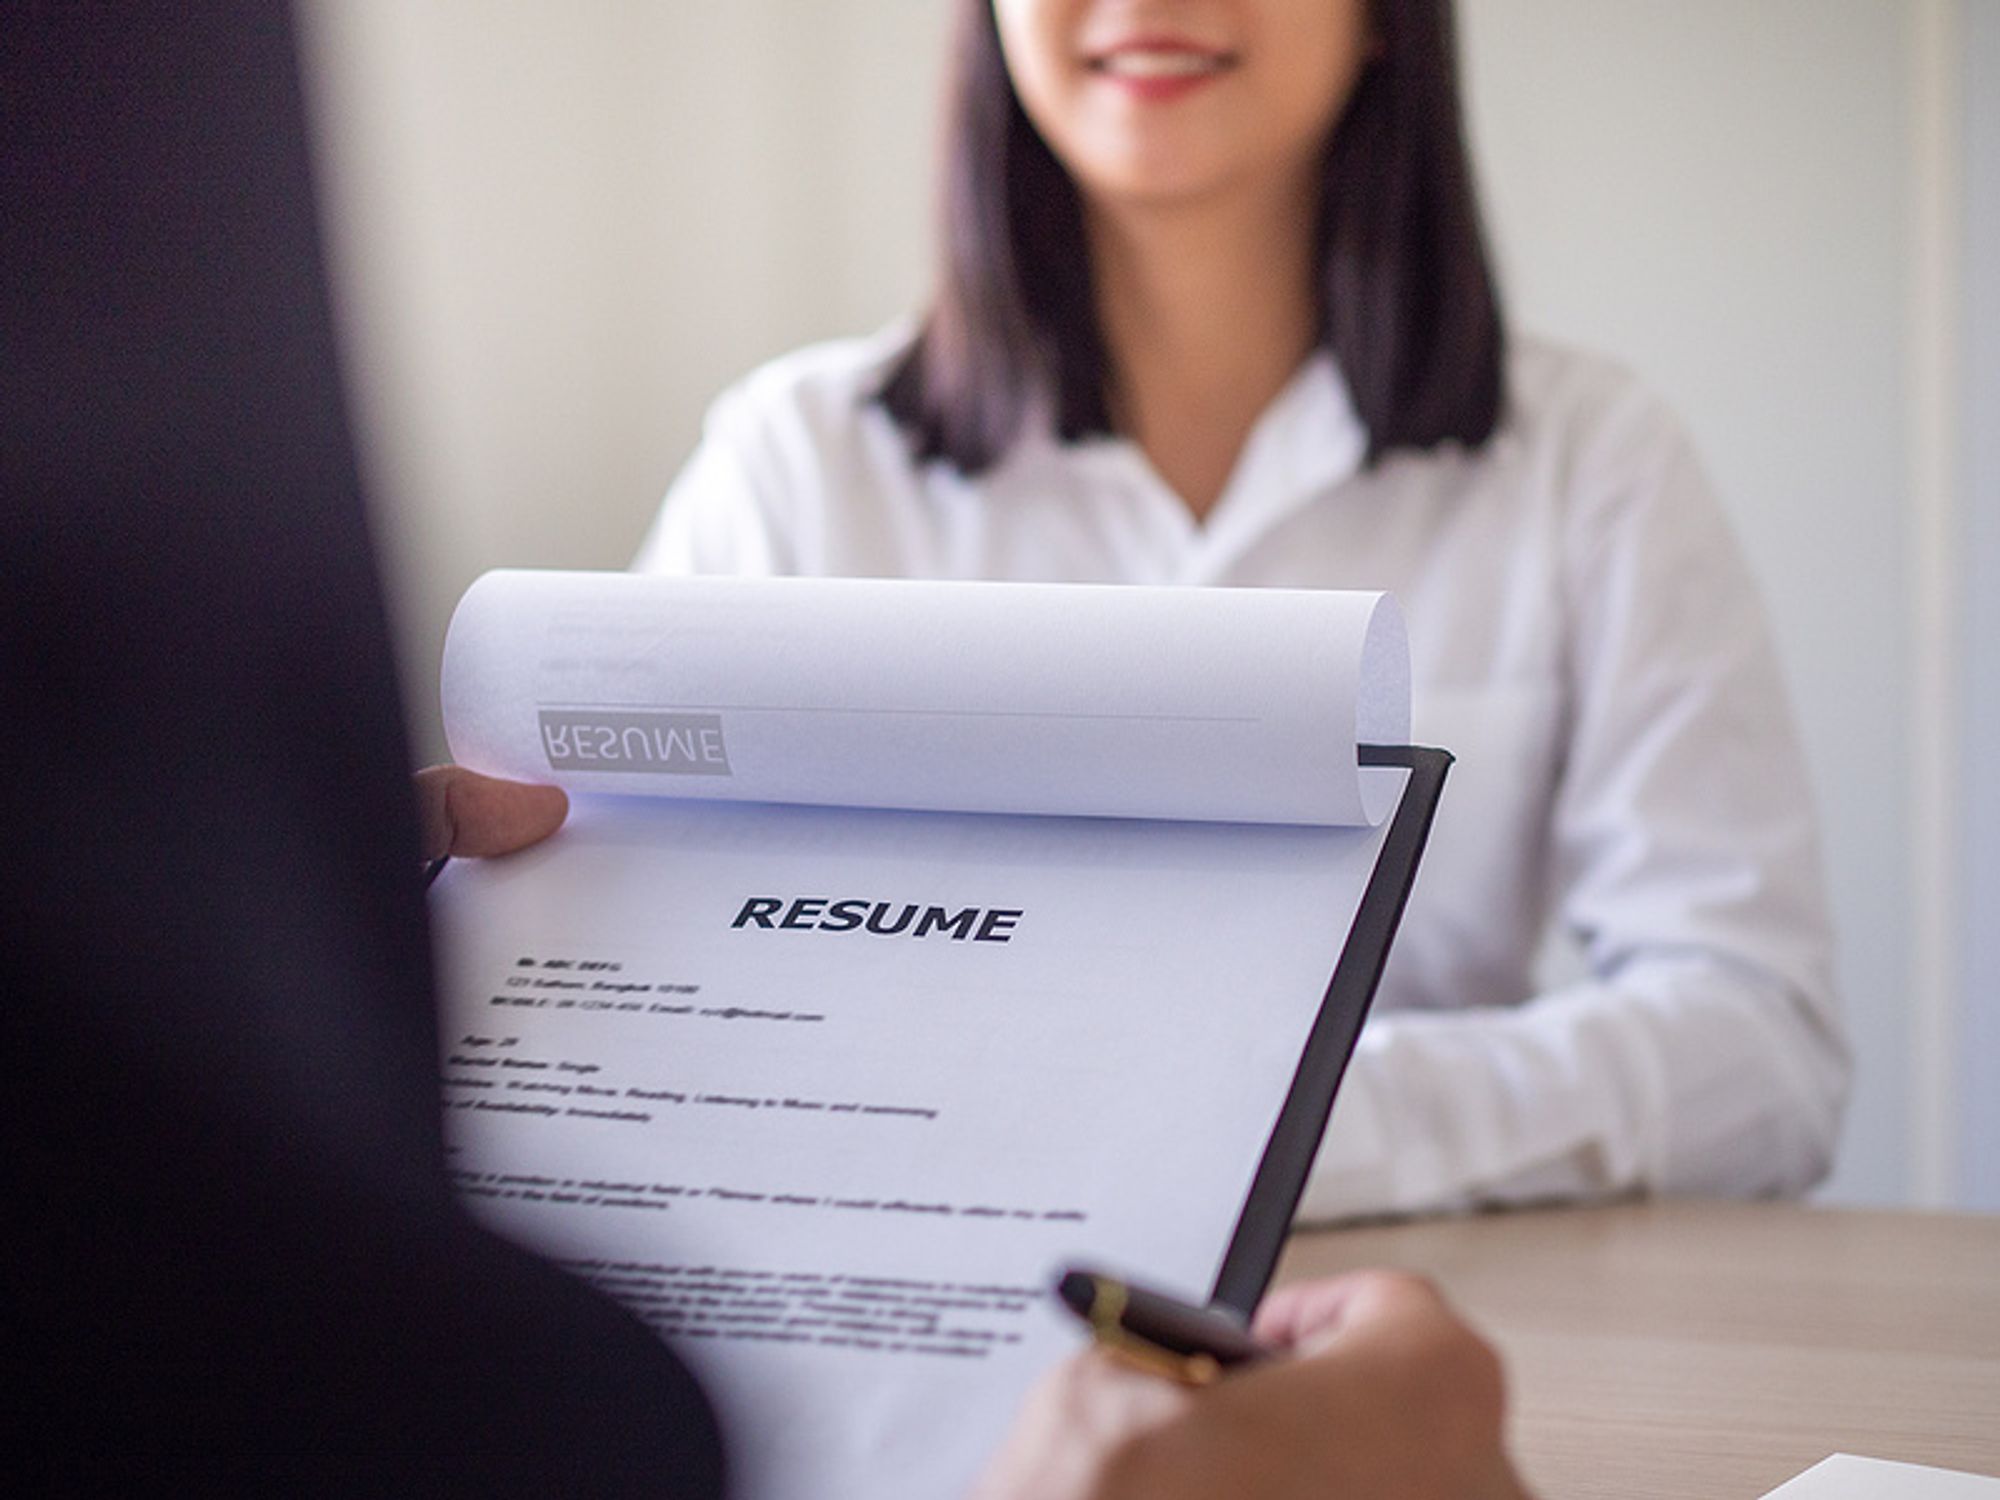 Hiring manager reads the job applicant's resume during an interview